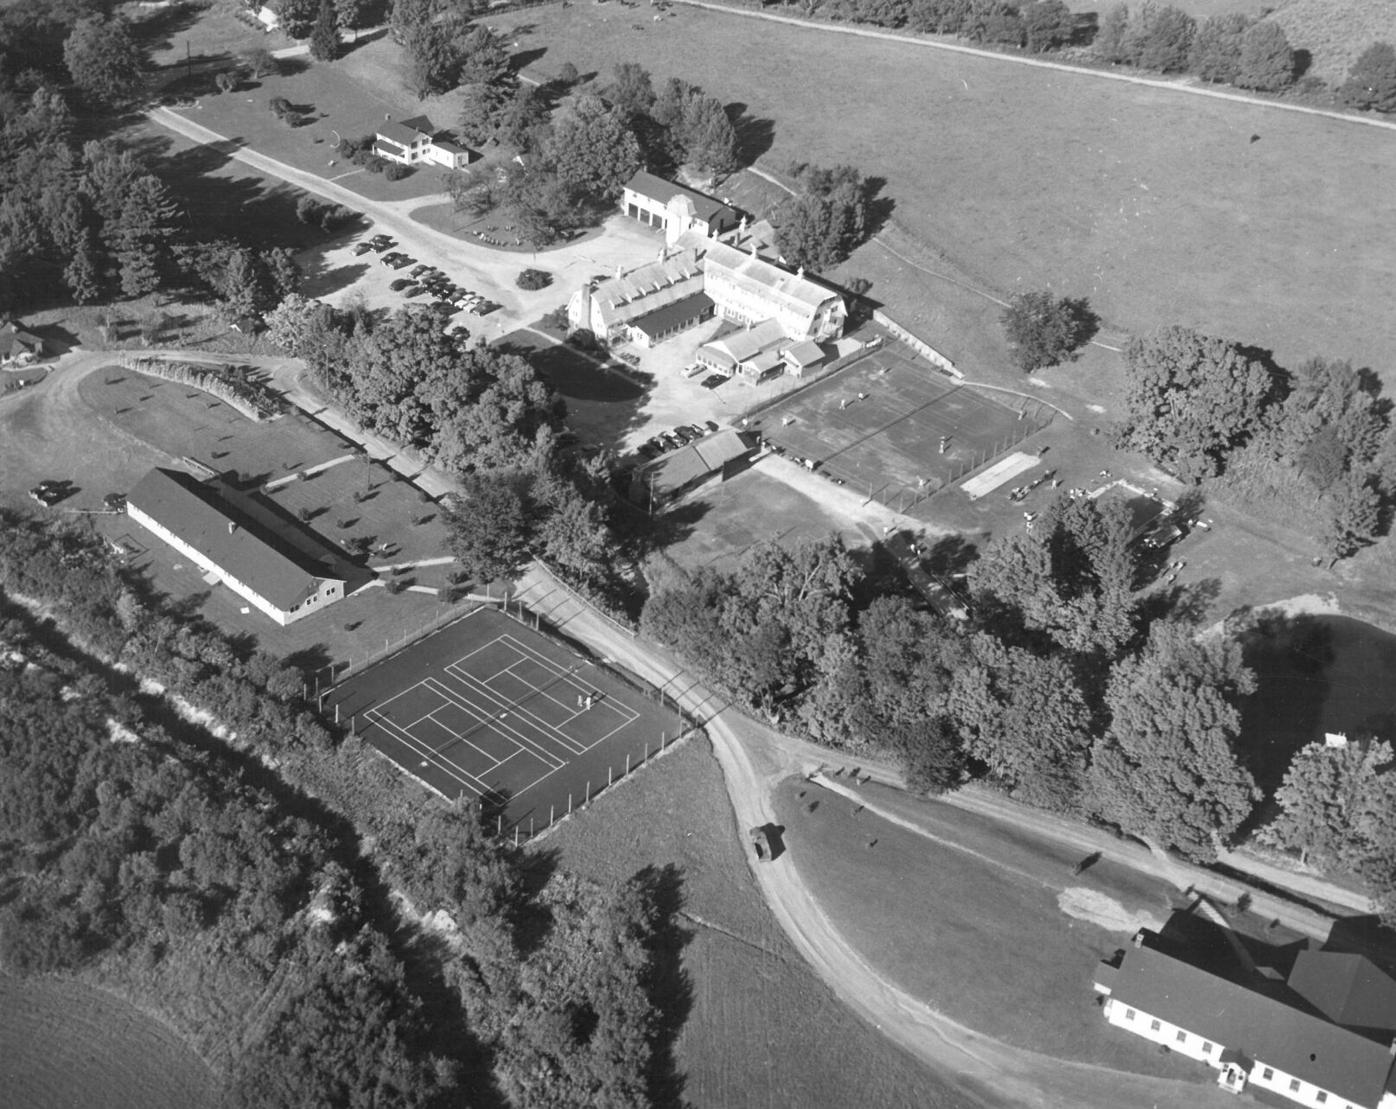 Aerial view of Jug End Barn, famous Berkshire year-round resort in Egremont